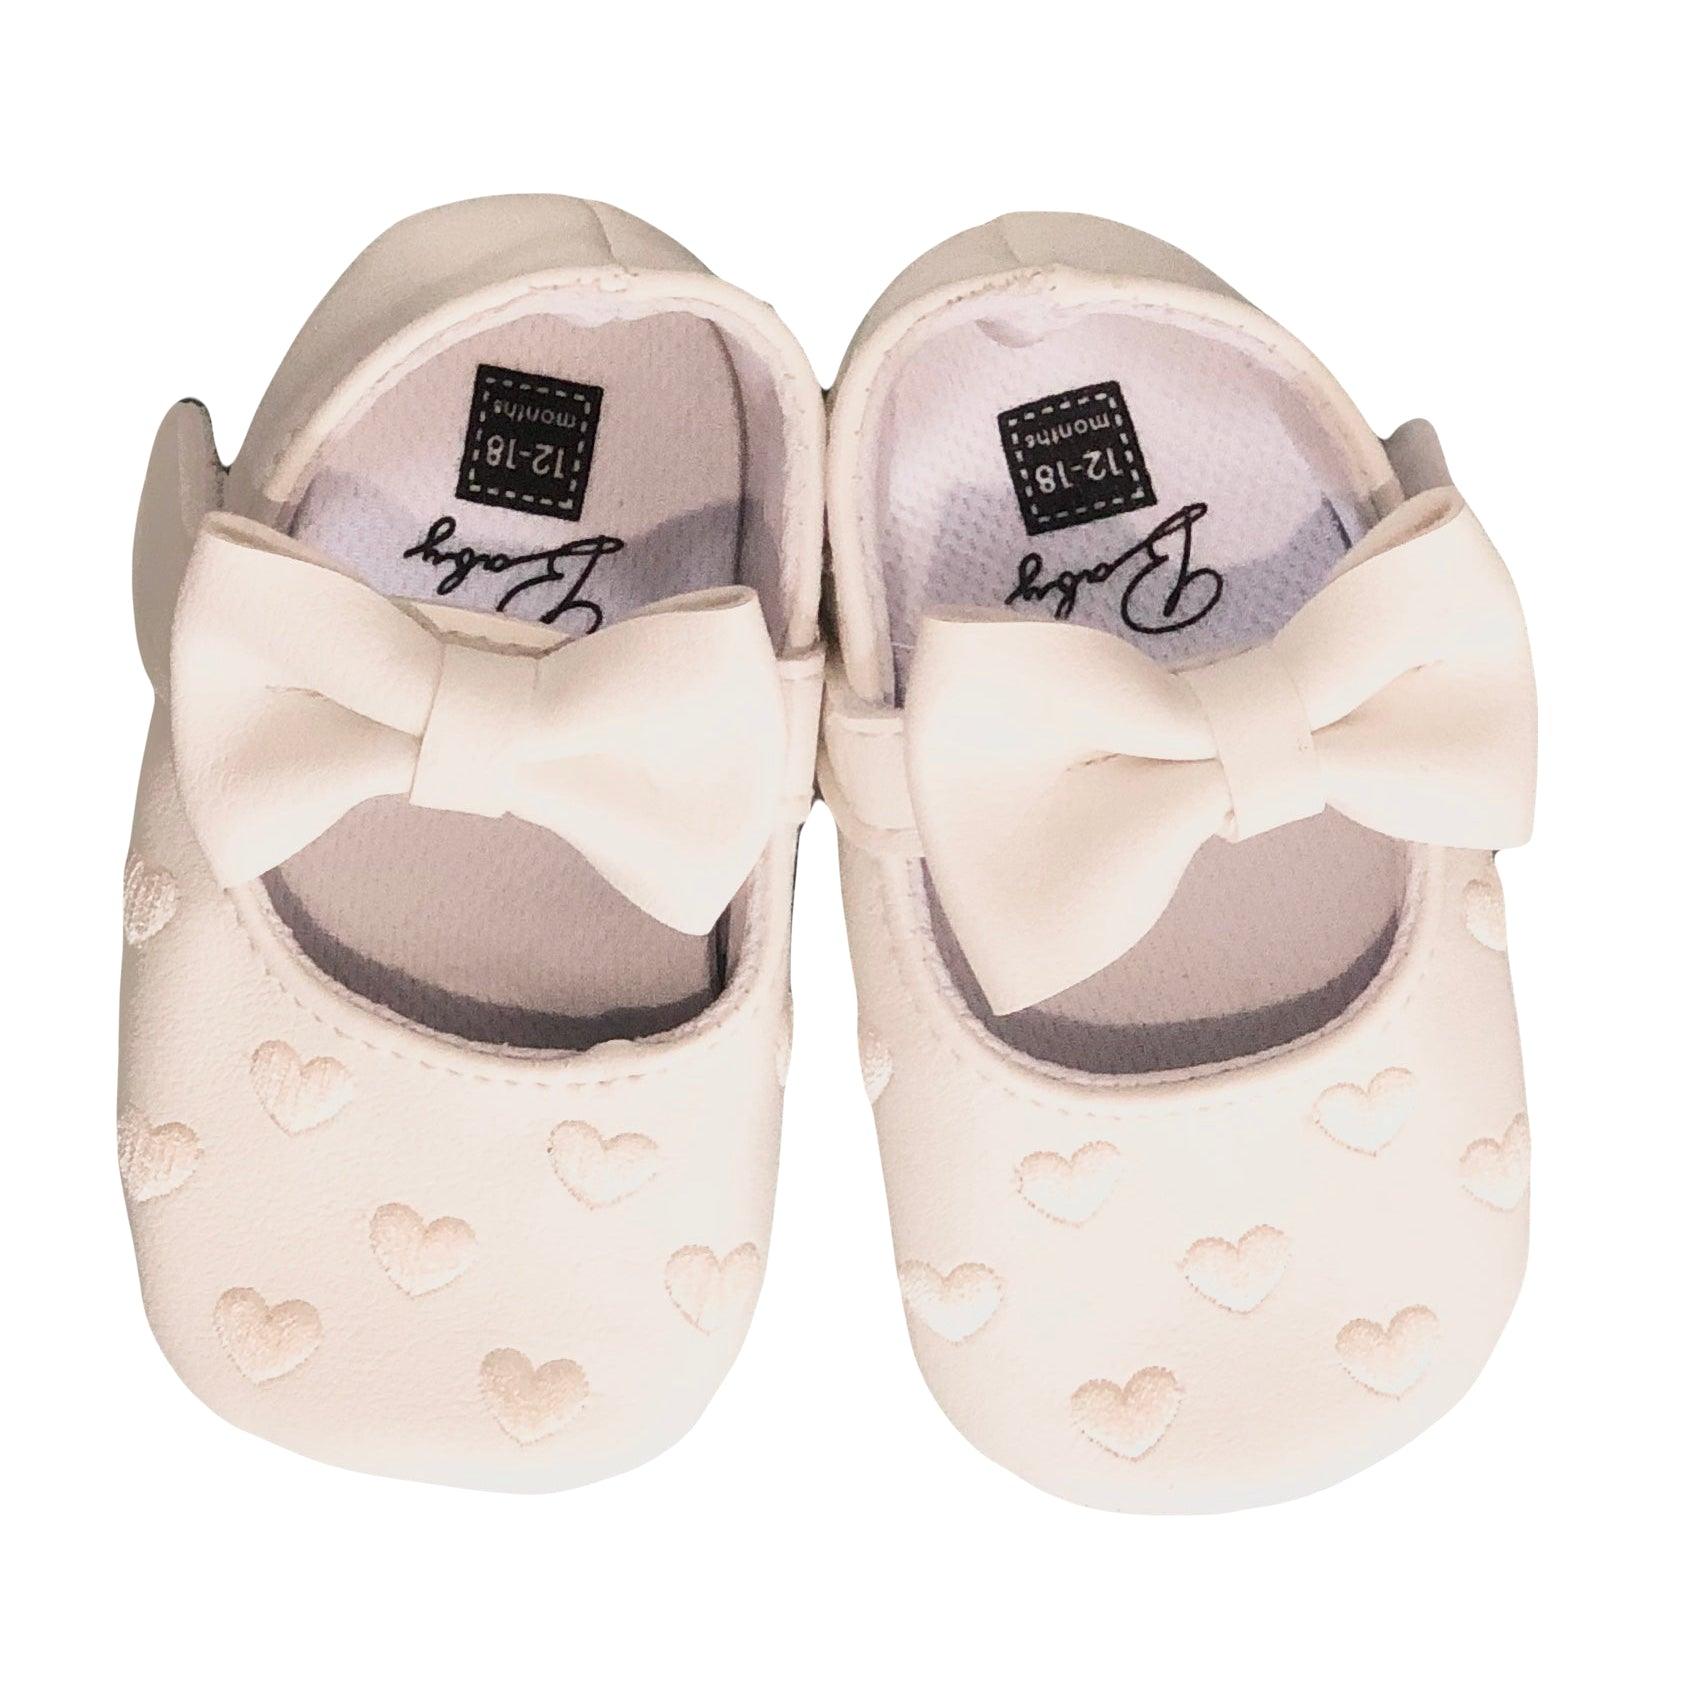 Heart Embroidered Pram Shoes | Oscar & Me | Baby & Children’s Clothing & Accessories